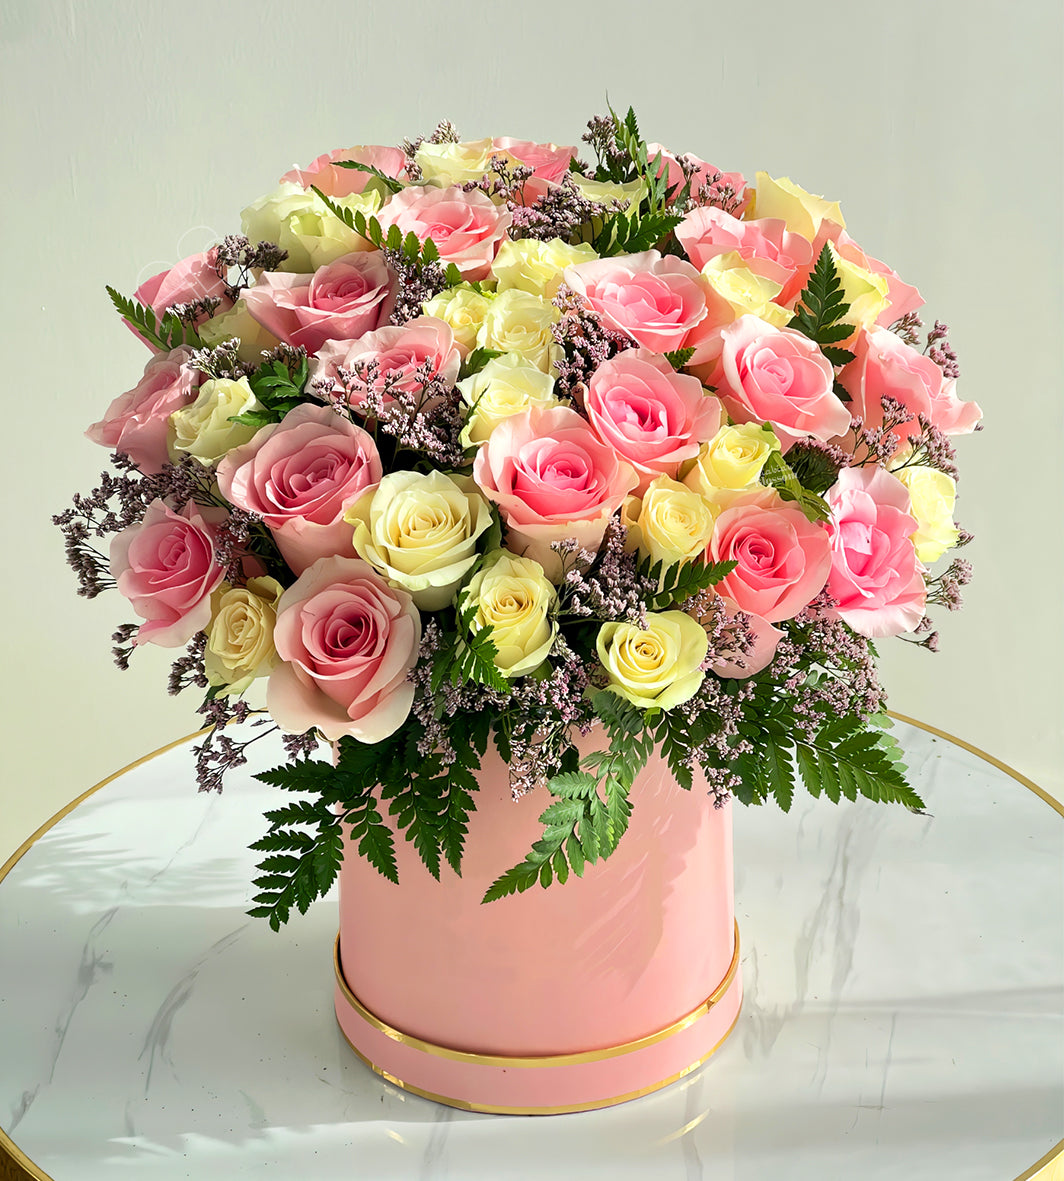 Blossom in a Box of Pink and White Roses - 40 Stems - Fresh Cut Flower